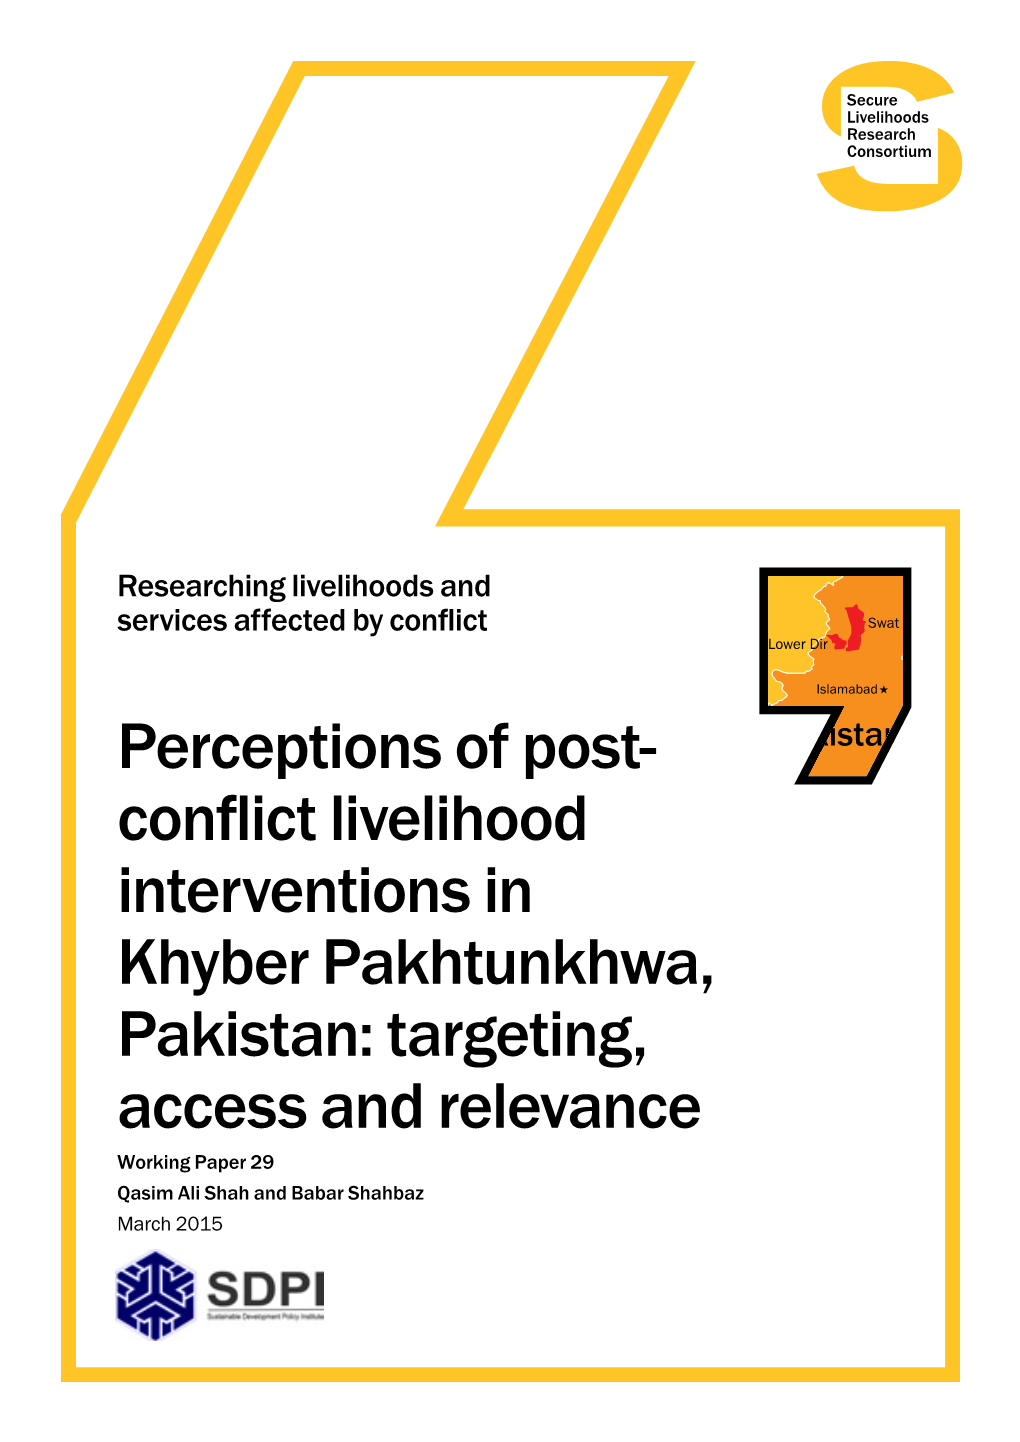 Perceptions of Post- Conflict Livelihood Interventions in Khyber